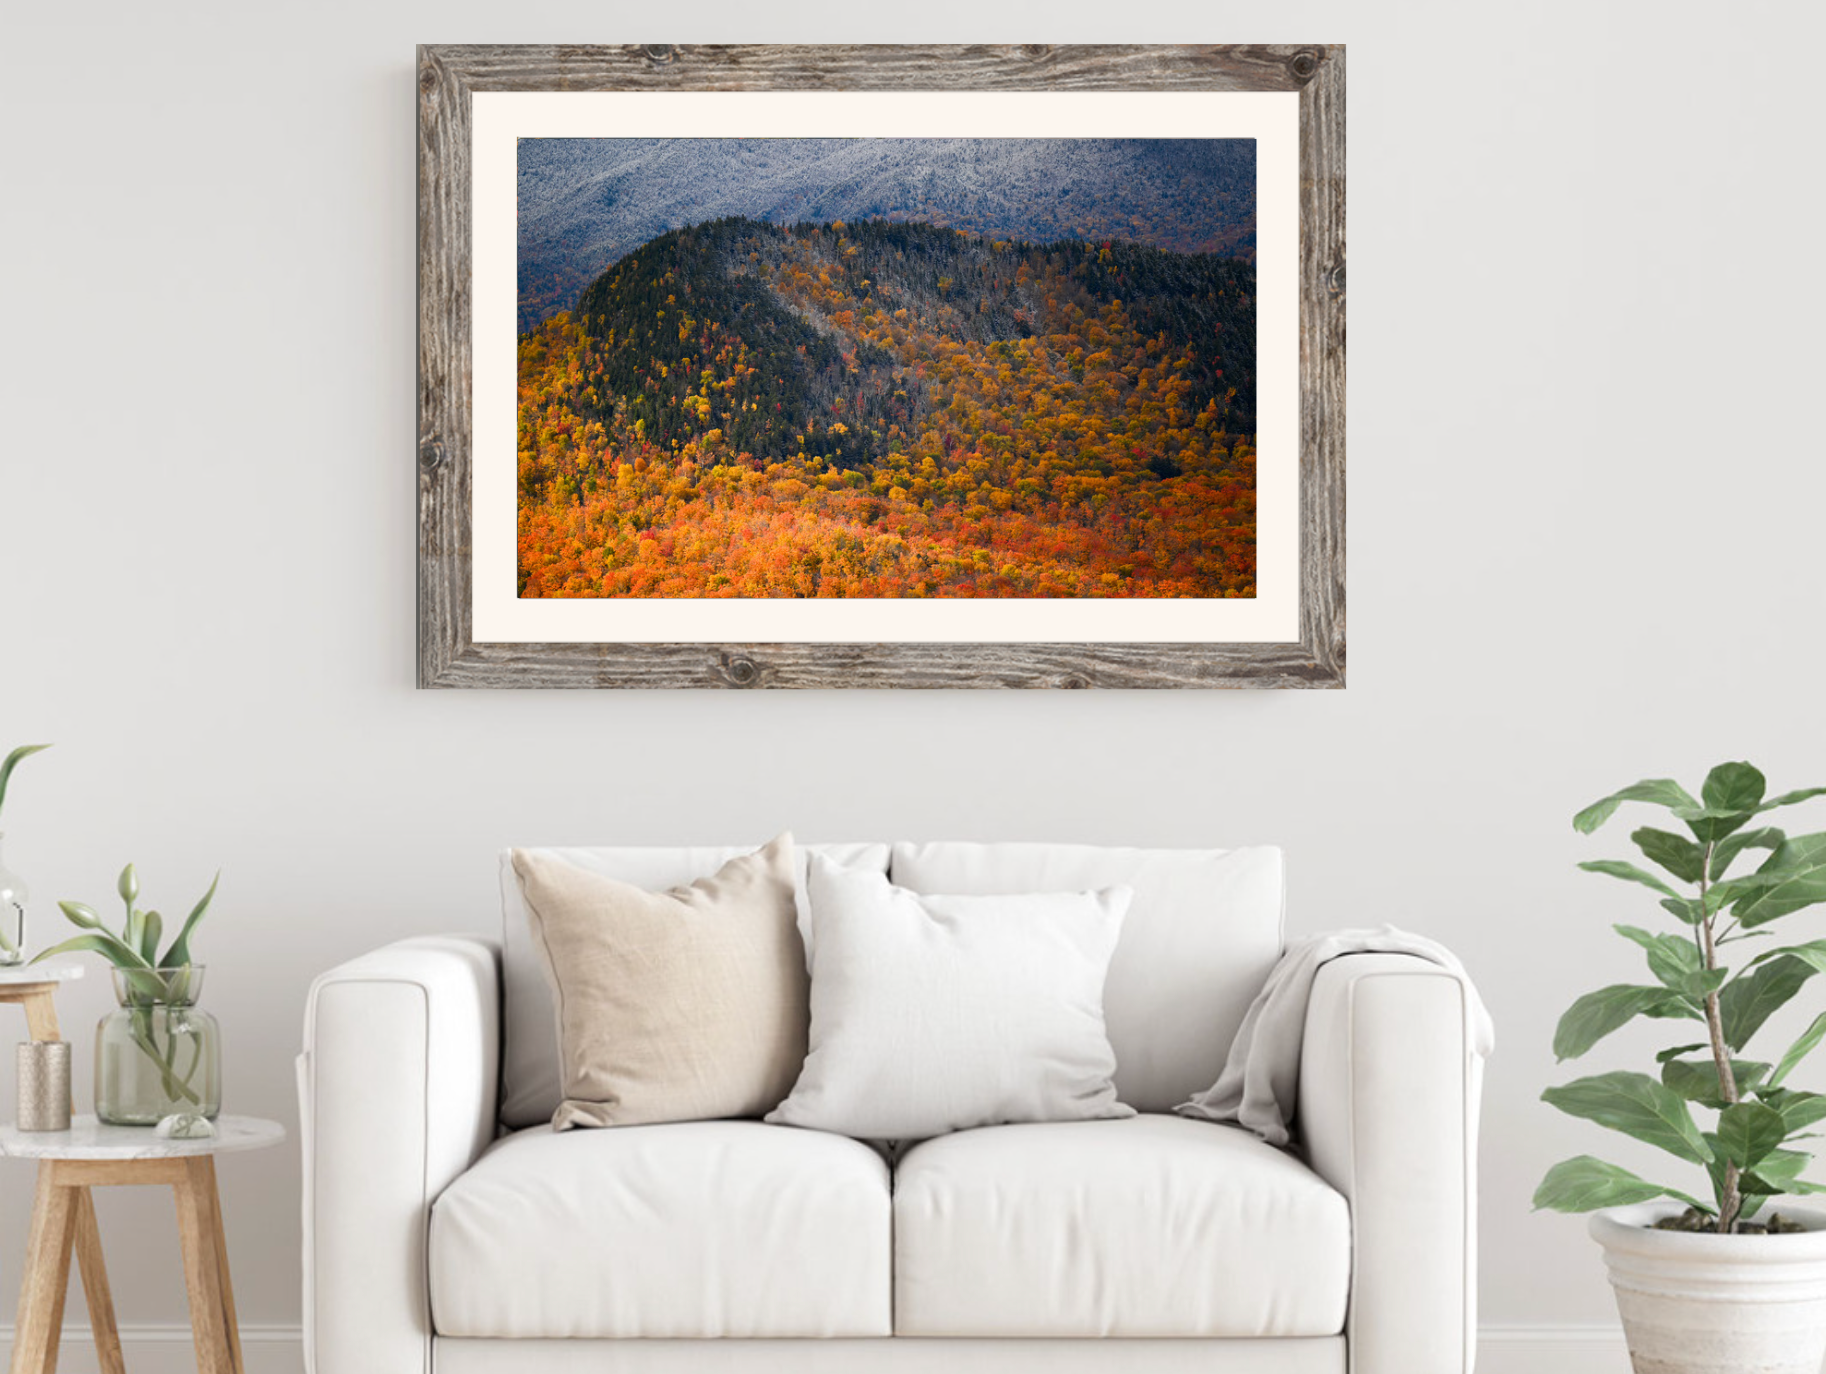 print of Freshly Fallen Snow and Fall Foliage 